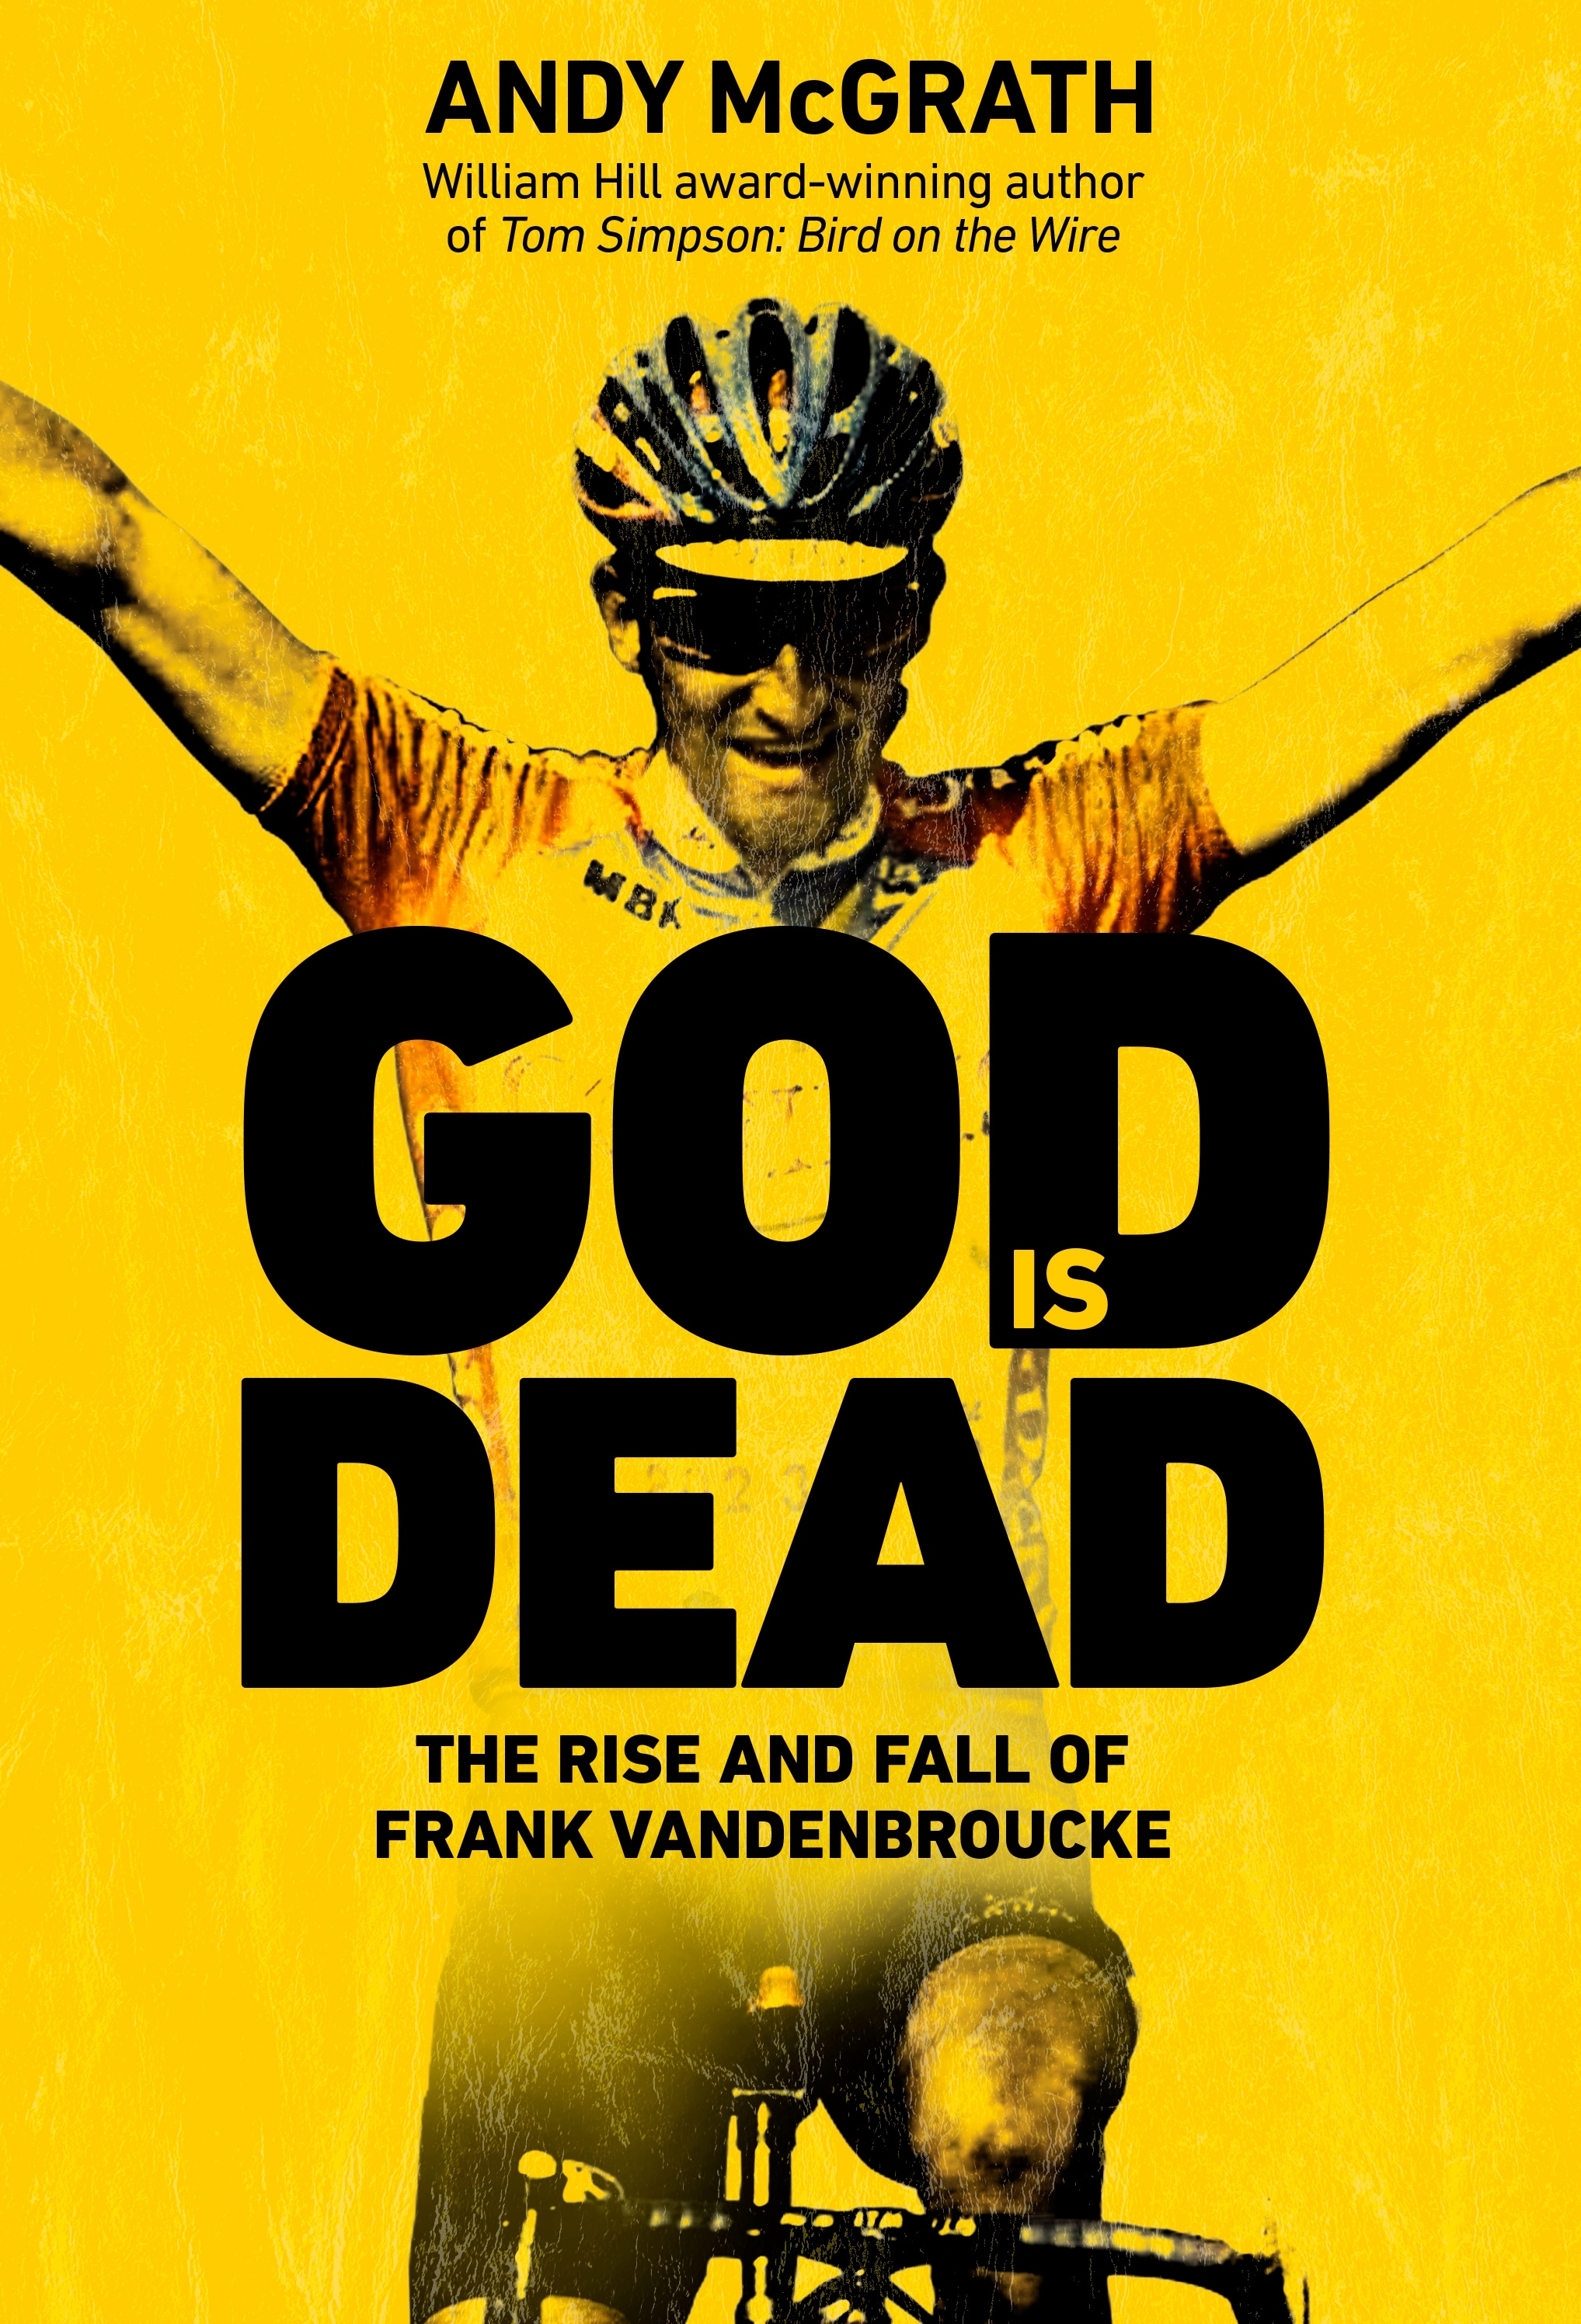 Book “God is Dead” by Andy McGrath — April 20, 2023